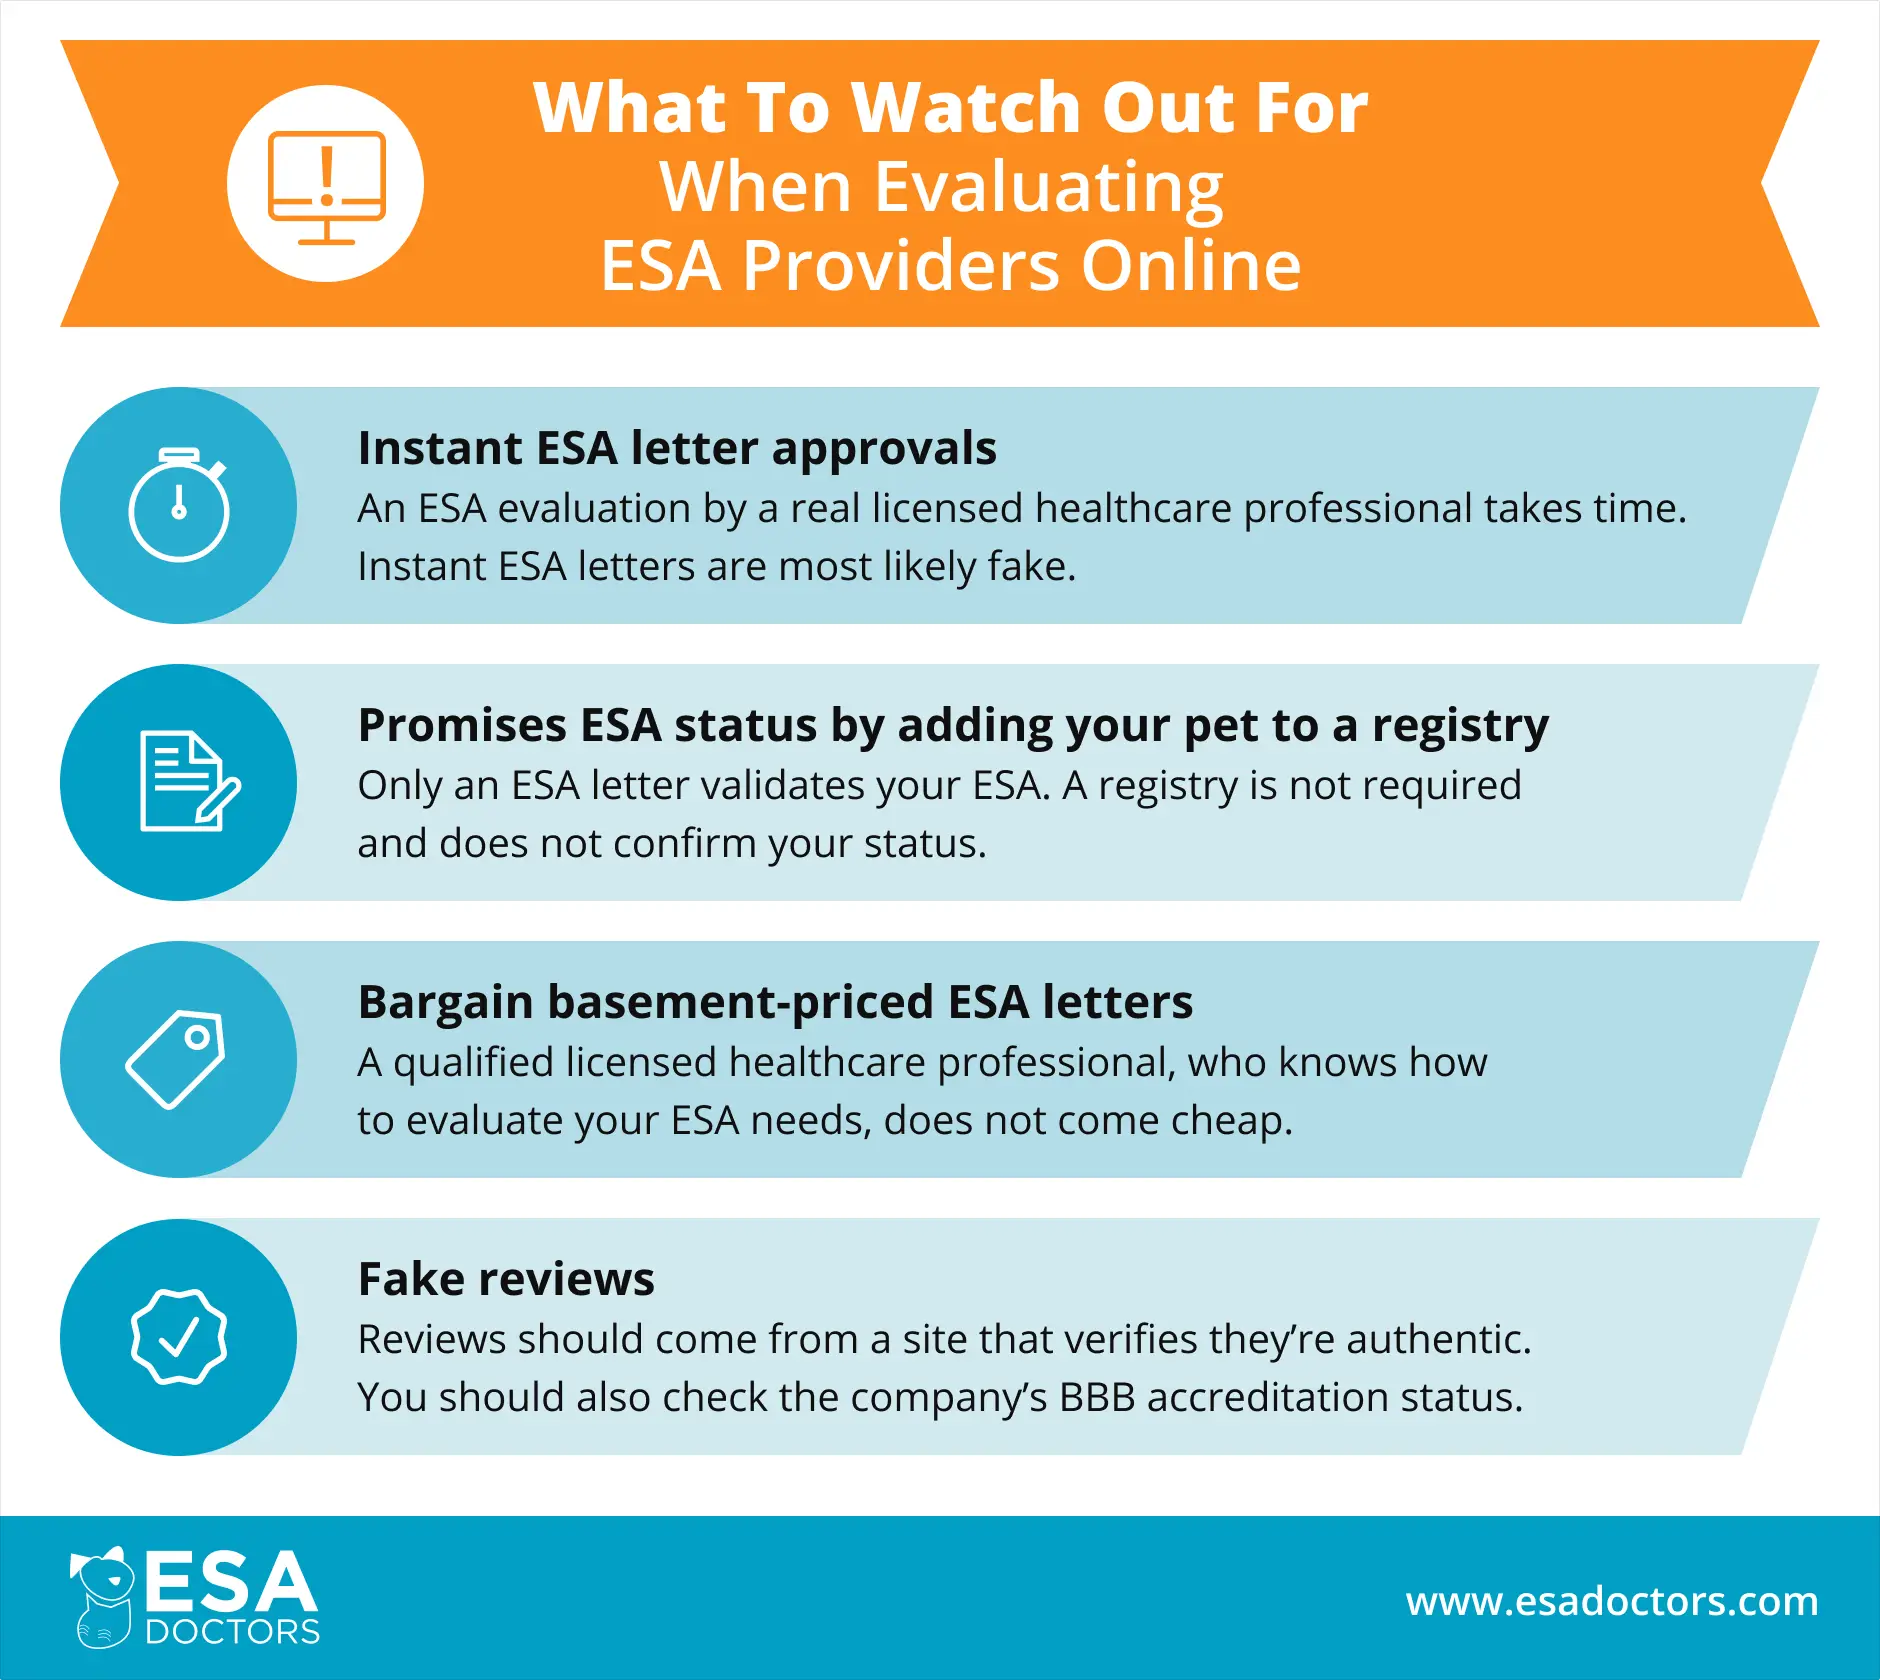 What to Watch Out for When Evaluating ESA Provider Online